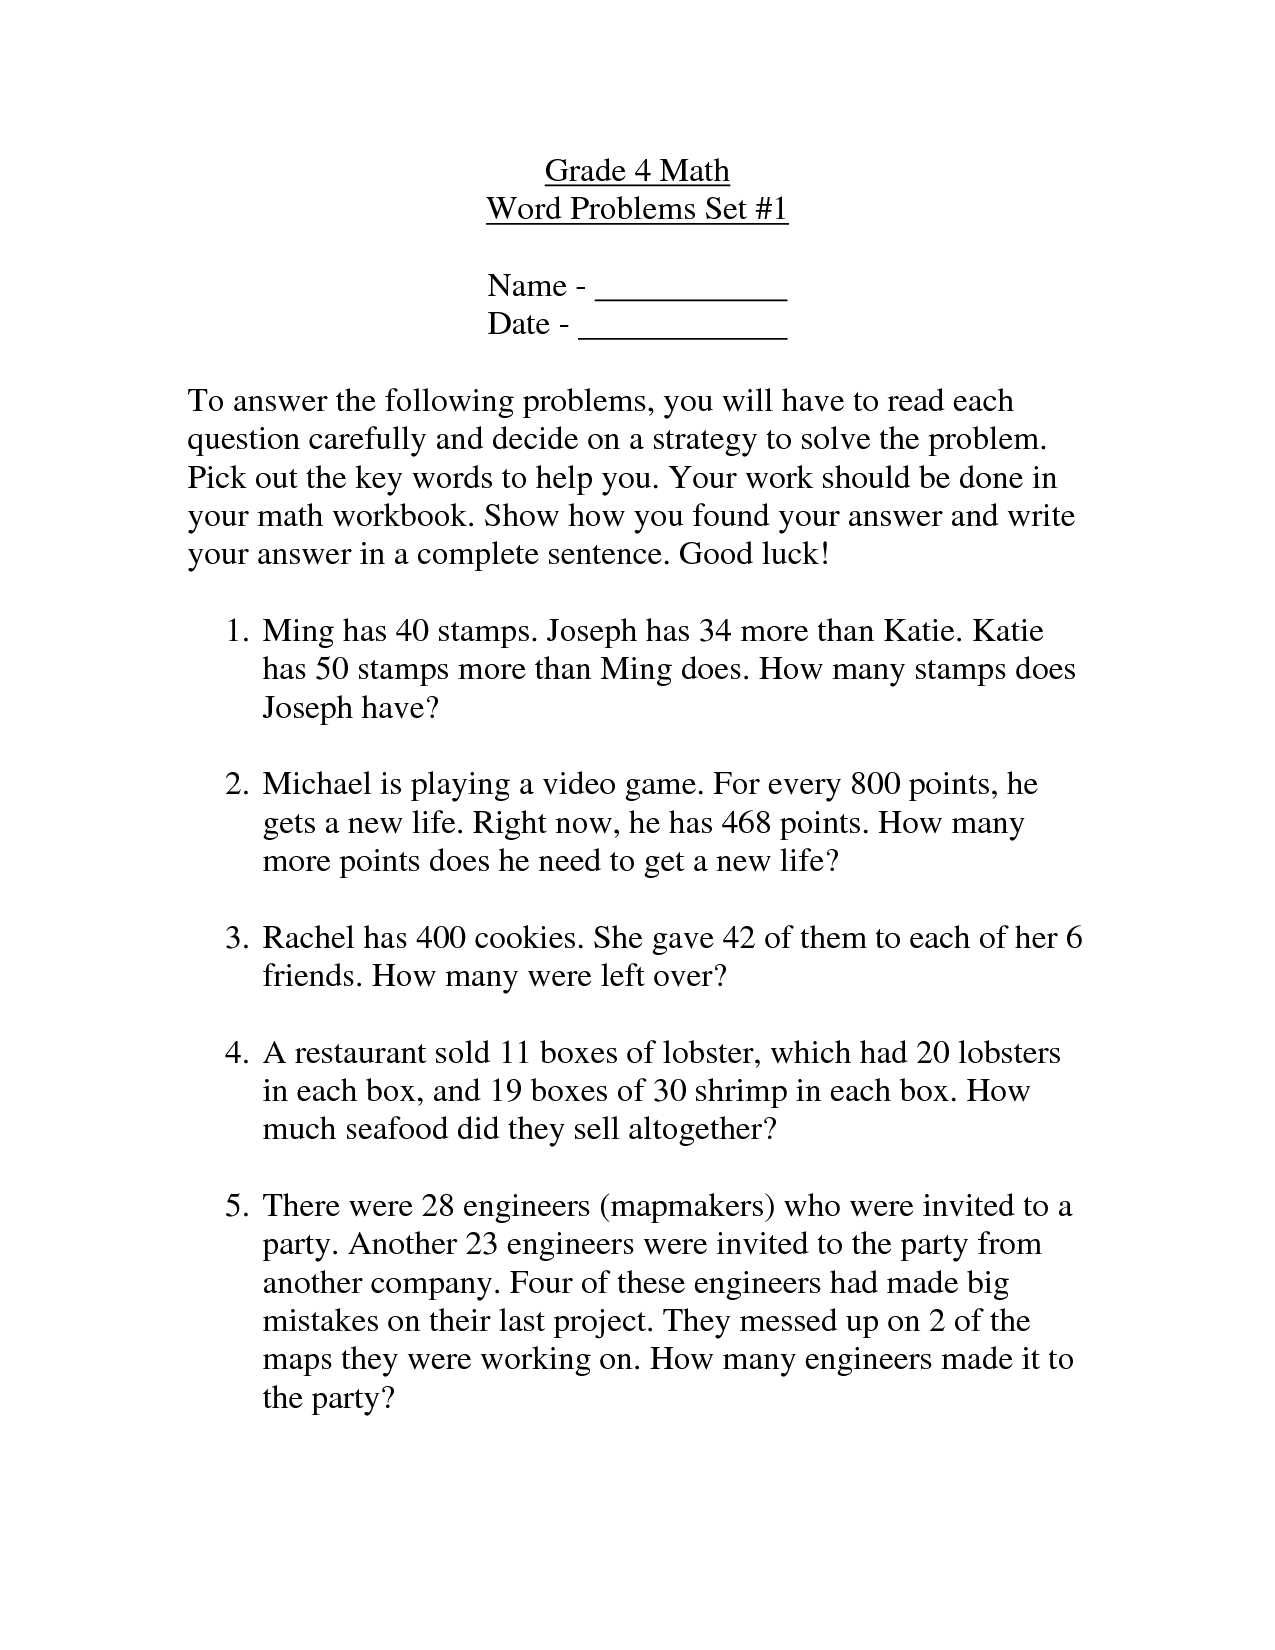 6-best-images-of-word-problem-worksheets-grade-4-4th-grade-math-word